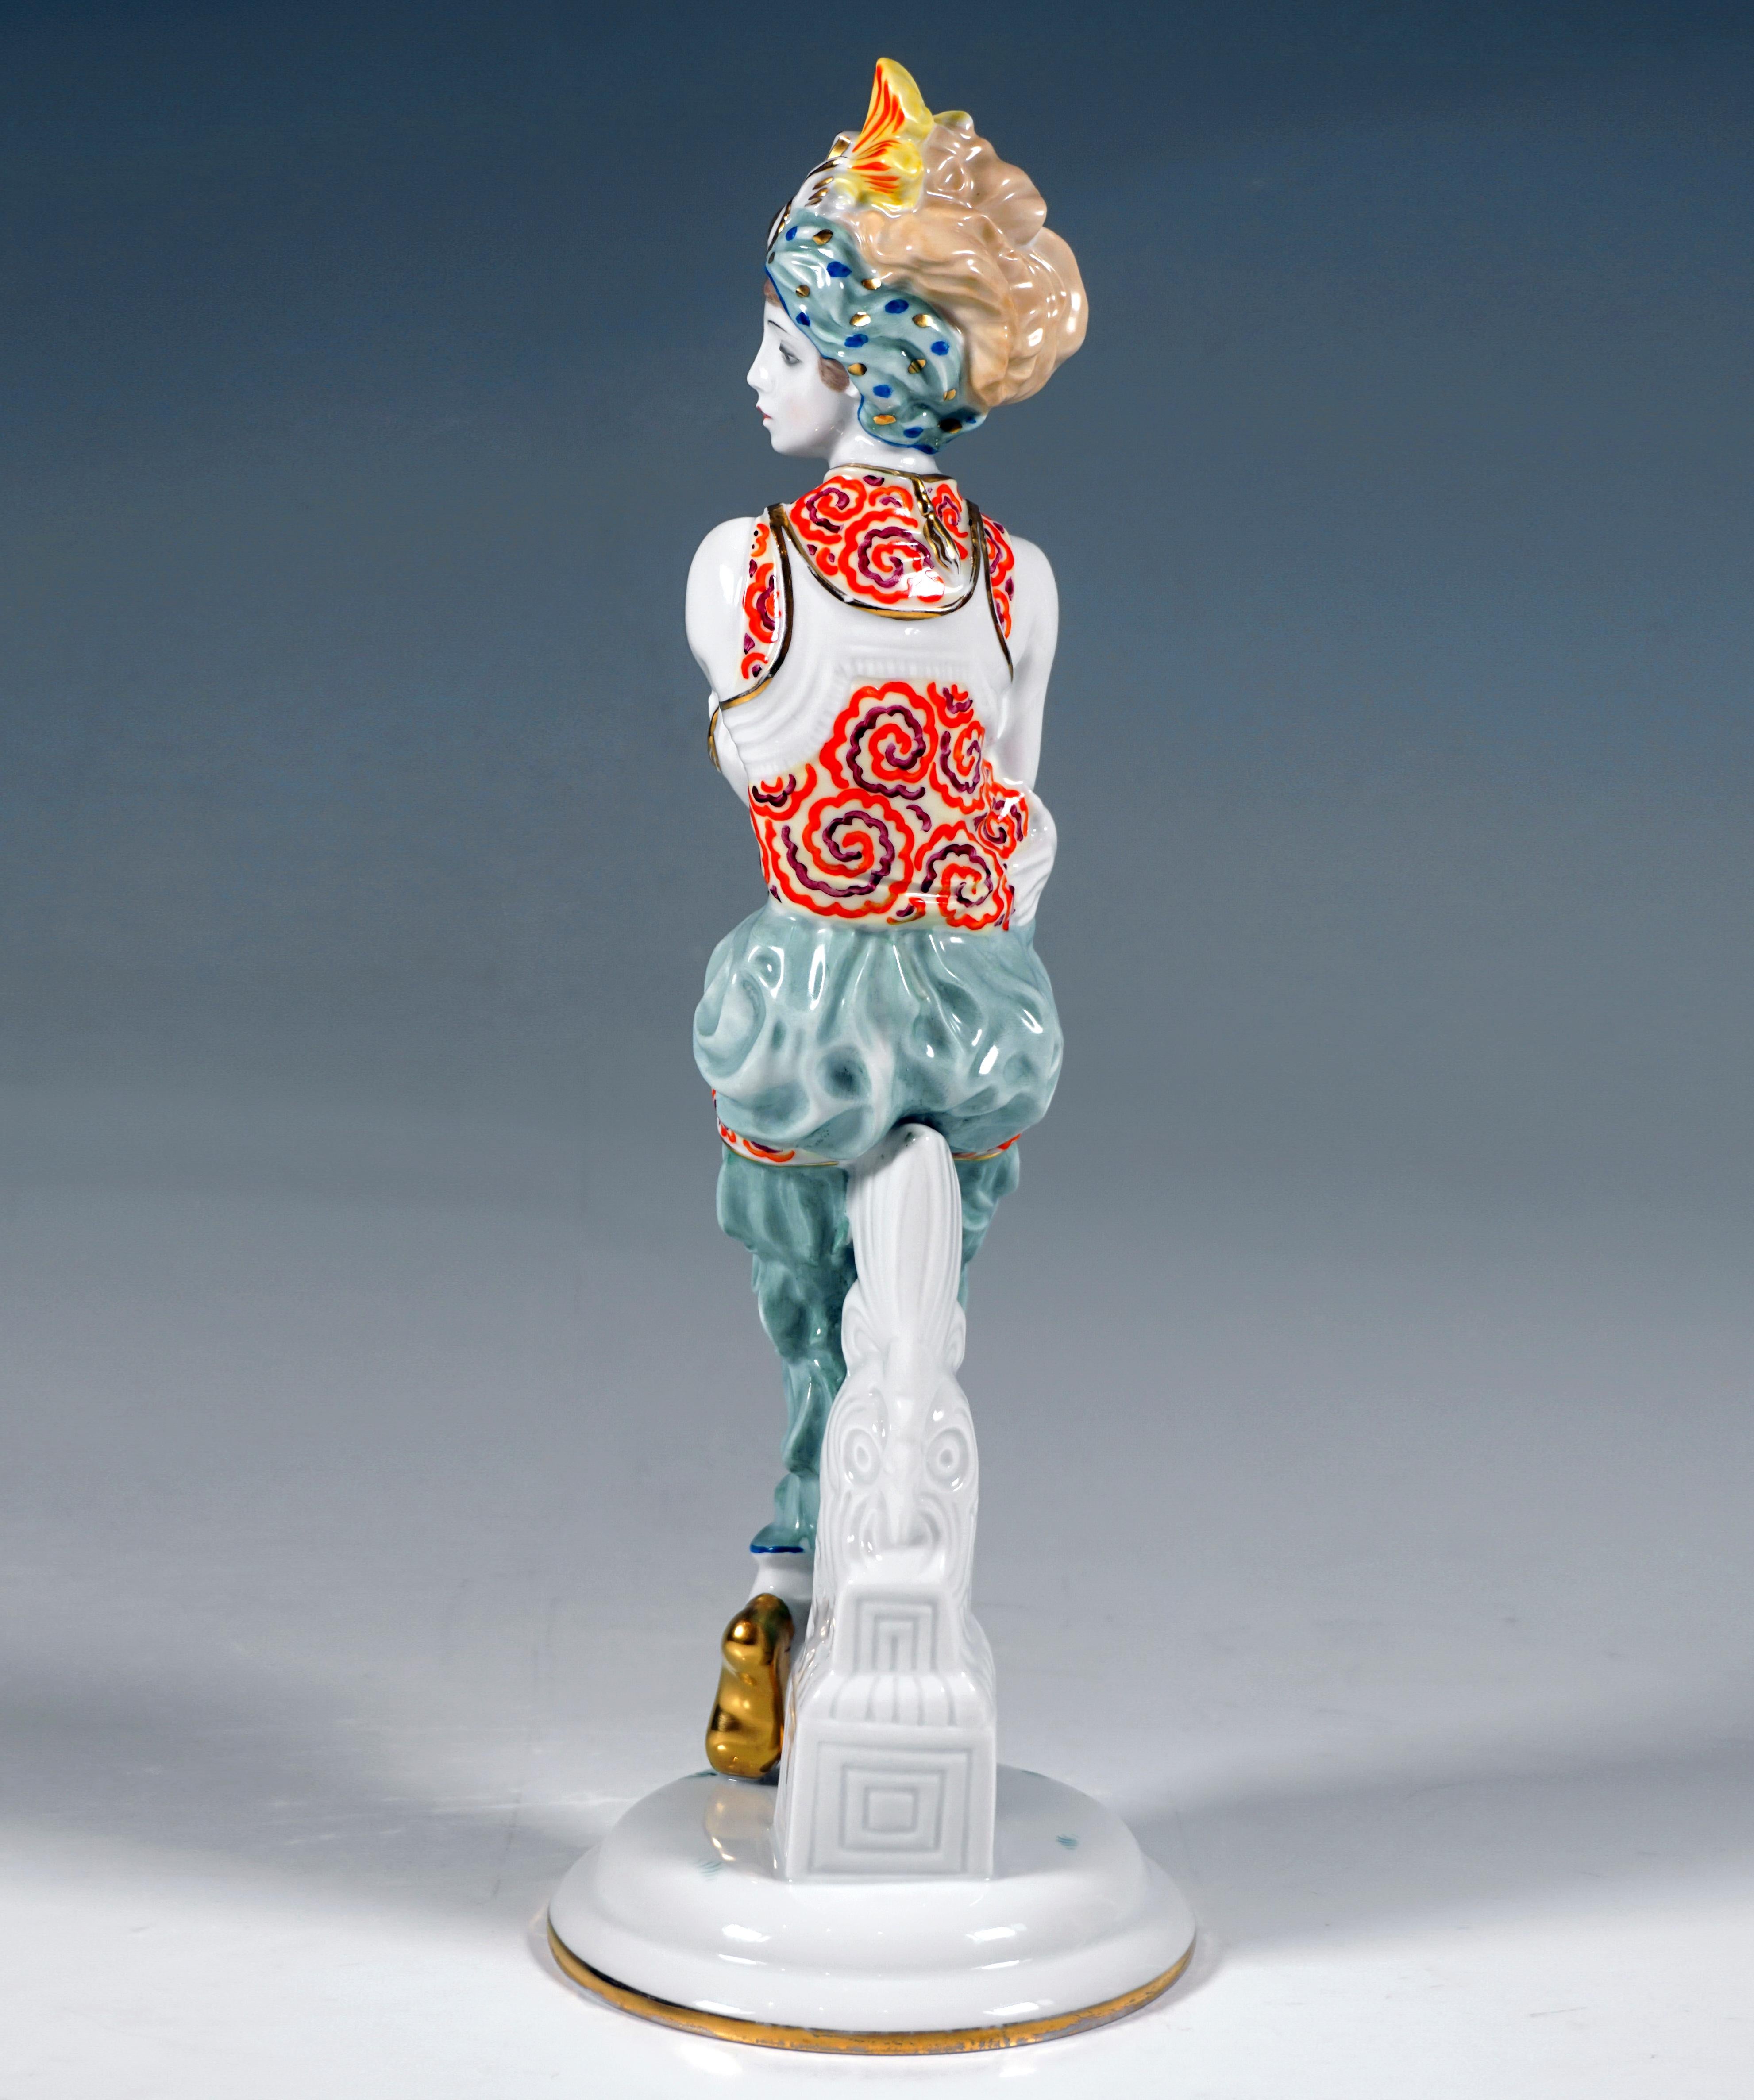 Hand-Crafted Art Déco Porcelain Figurine 'Tsarina', by C. Holzer-Defanti, Rosenthal Germany